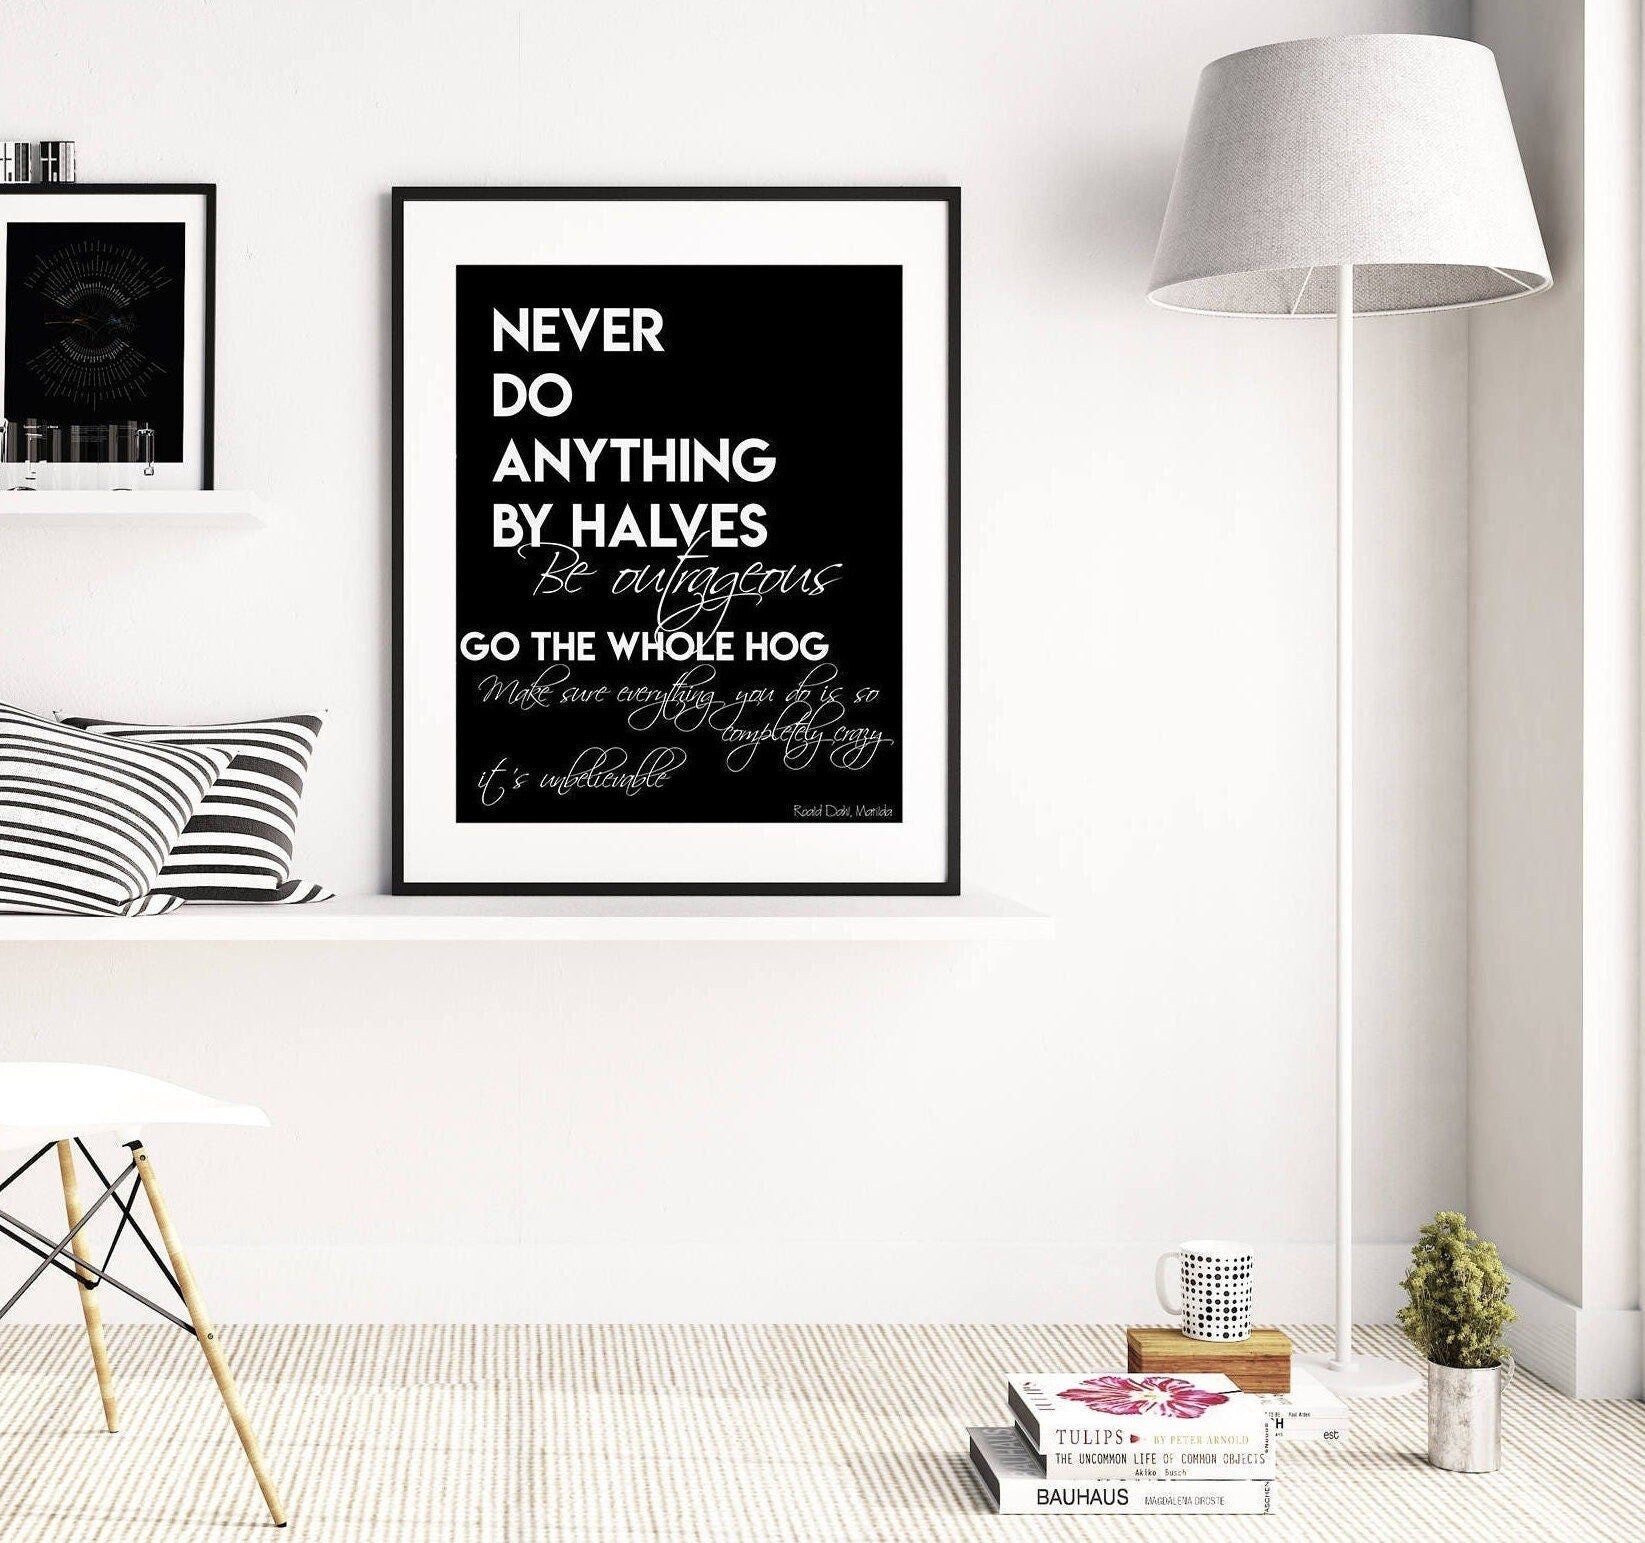 Roald Dahl MATILDA Wall Art Print in Black & White, Never Do Anything By Halves Quote for Kid's Room